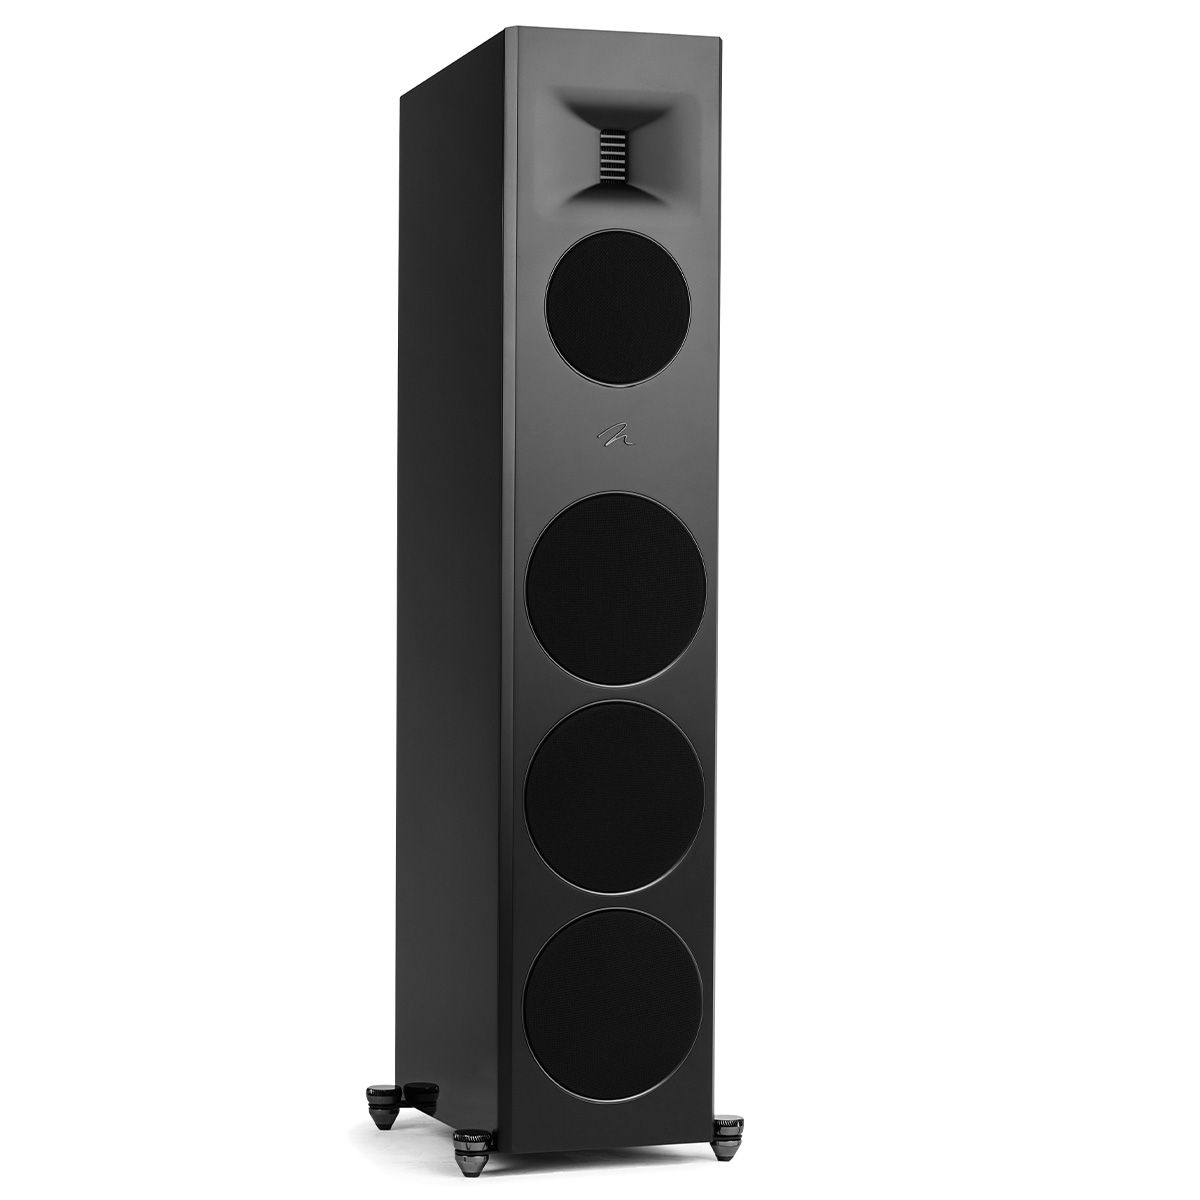 MartinLogan Motion XT F200  Floorstanding Speaker in black, angled view with grilles